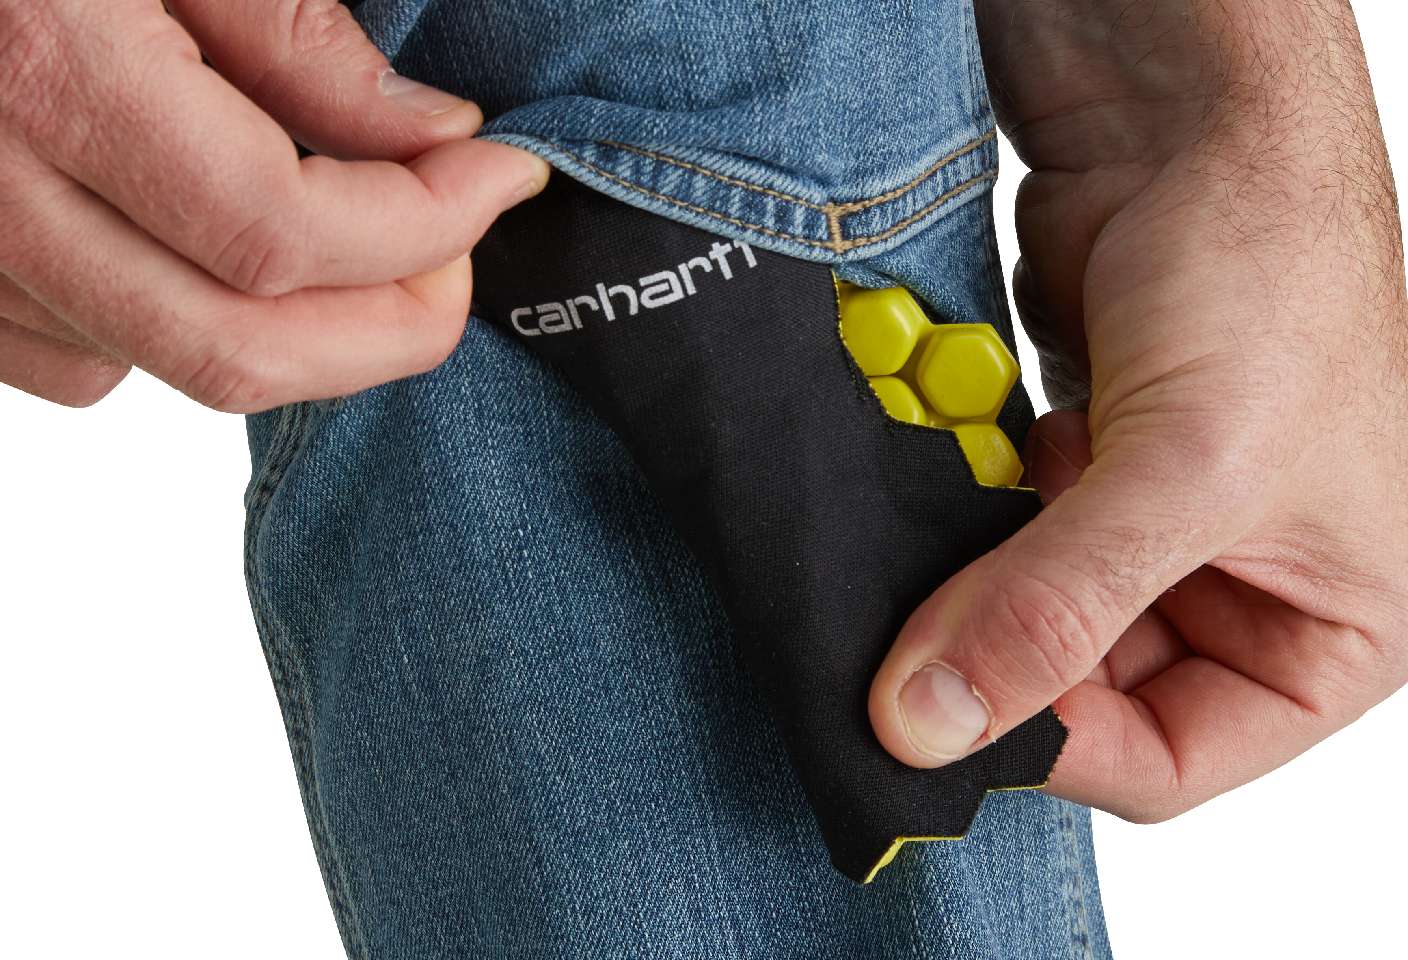 Compatible with the Carhartt Knee Pad.